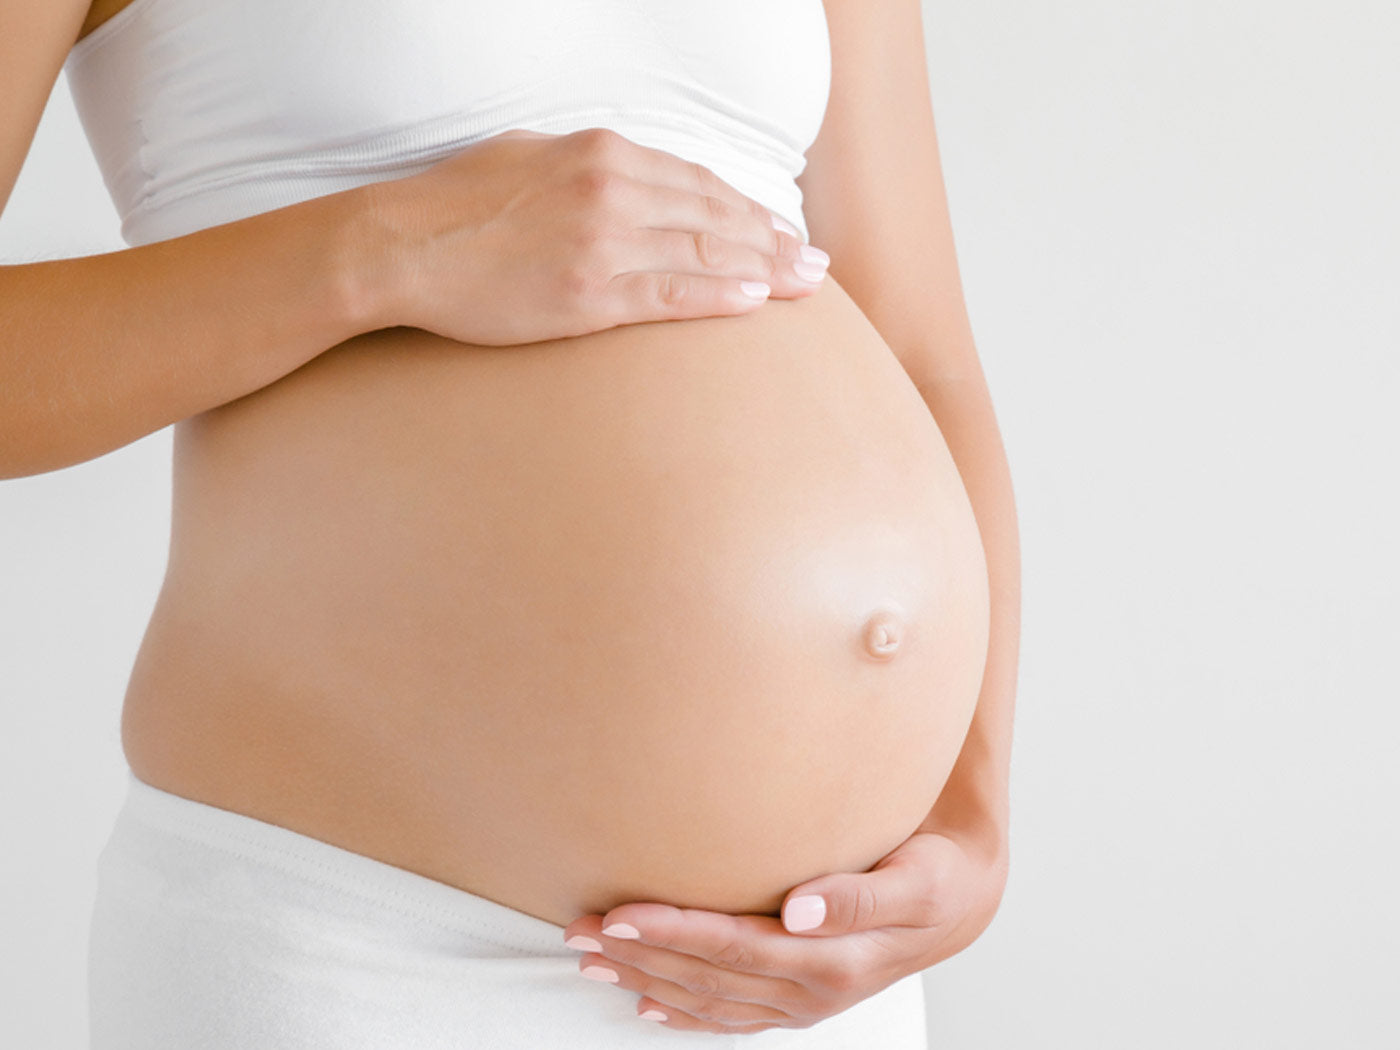 How To Take Care Of Skin Care During Pregnancy